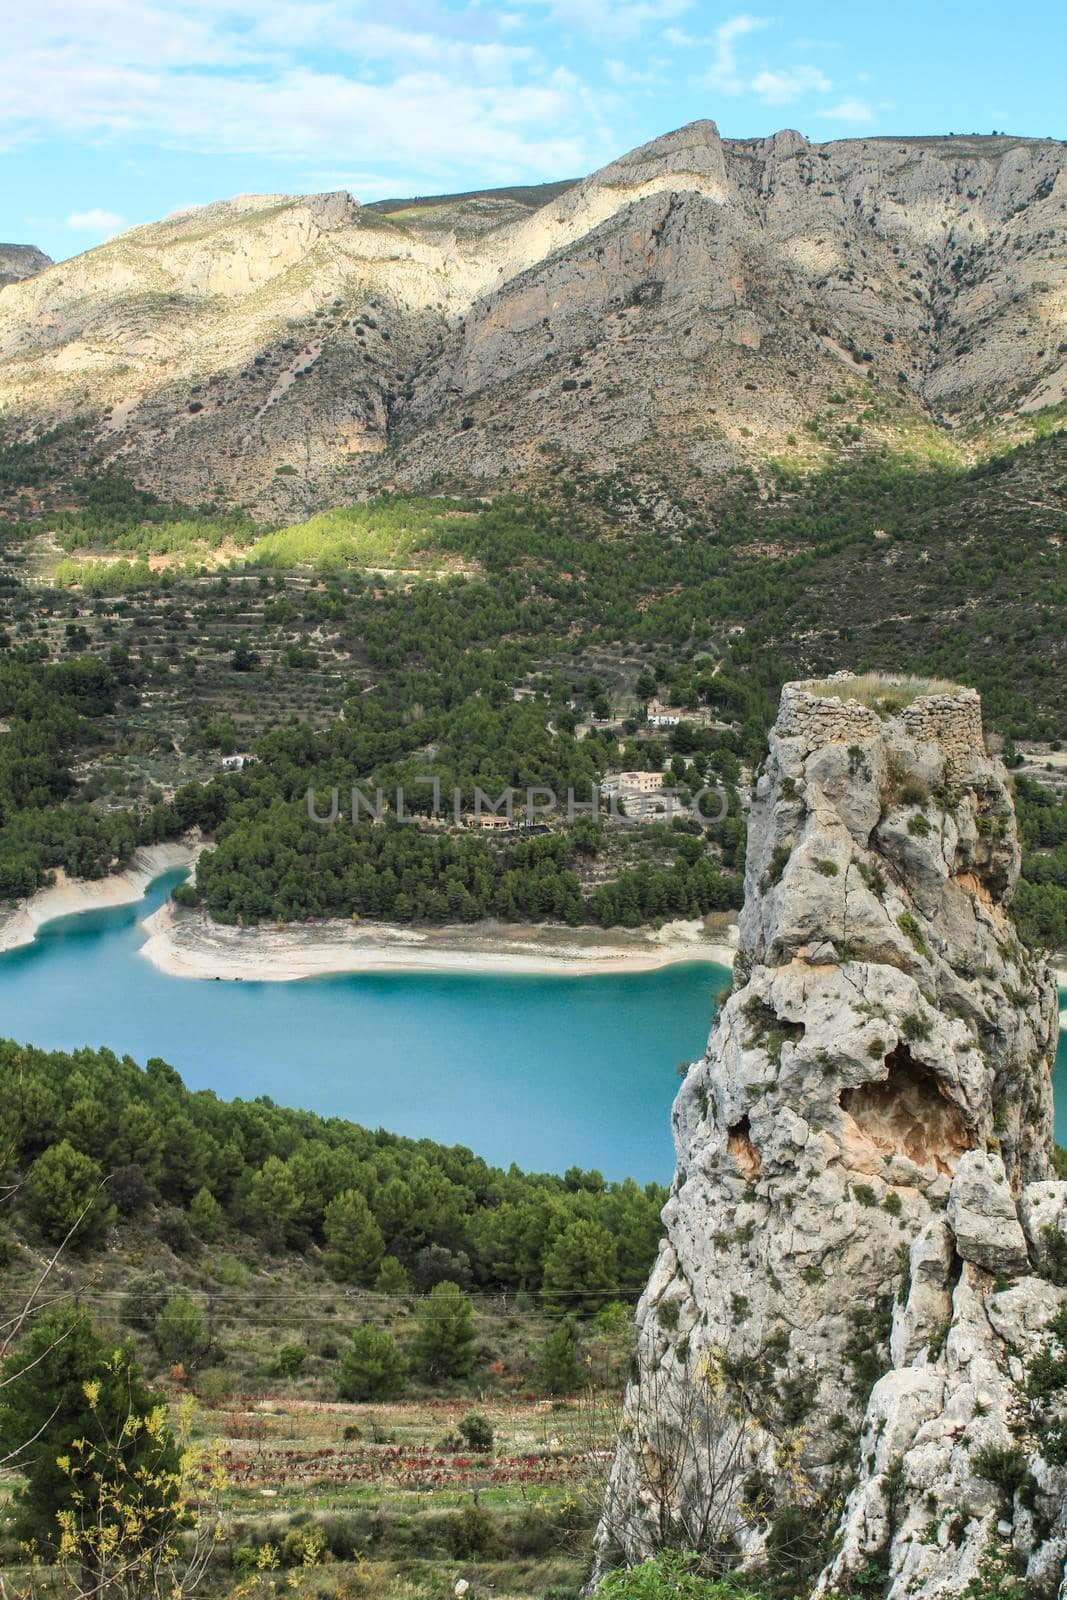 Guadalest village surrounded by vegetation and the Castle by soniabonet